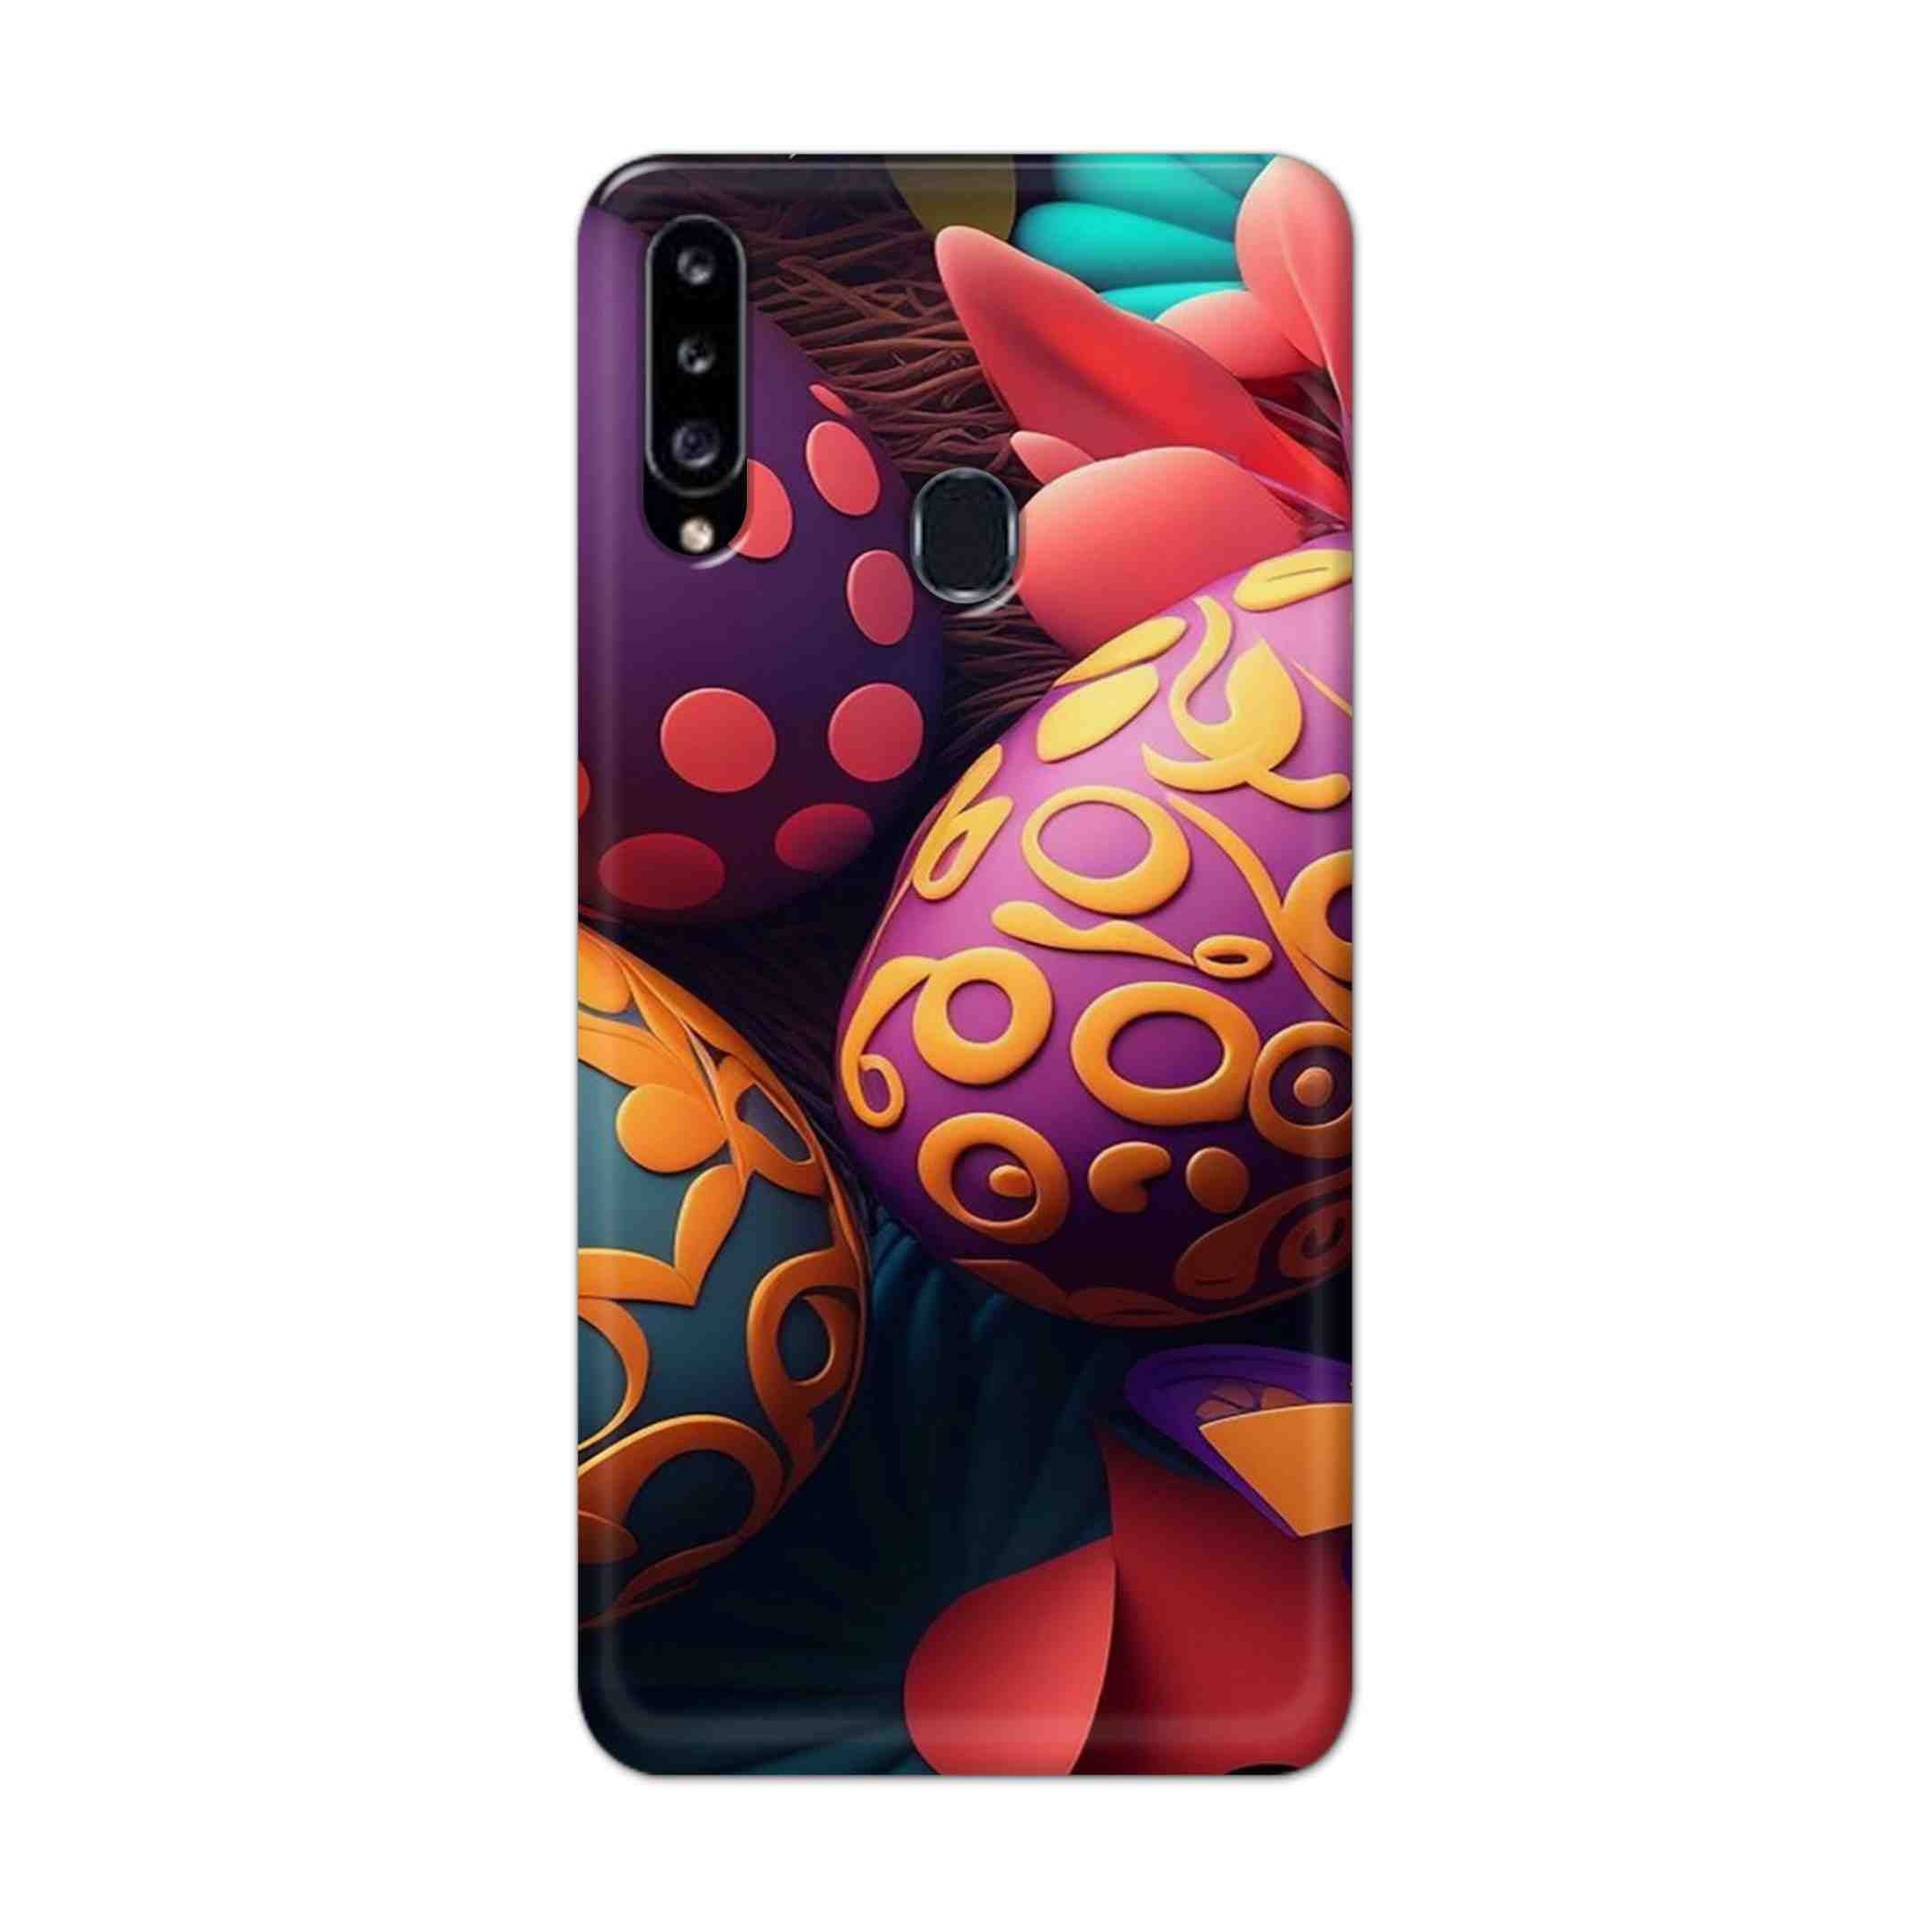 Buy Easter Egg Hard Back Mobile Phone Case Cover For Samsung Galaxy A21 Online